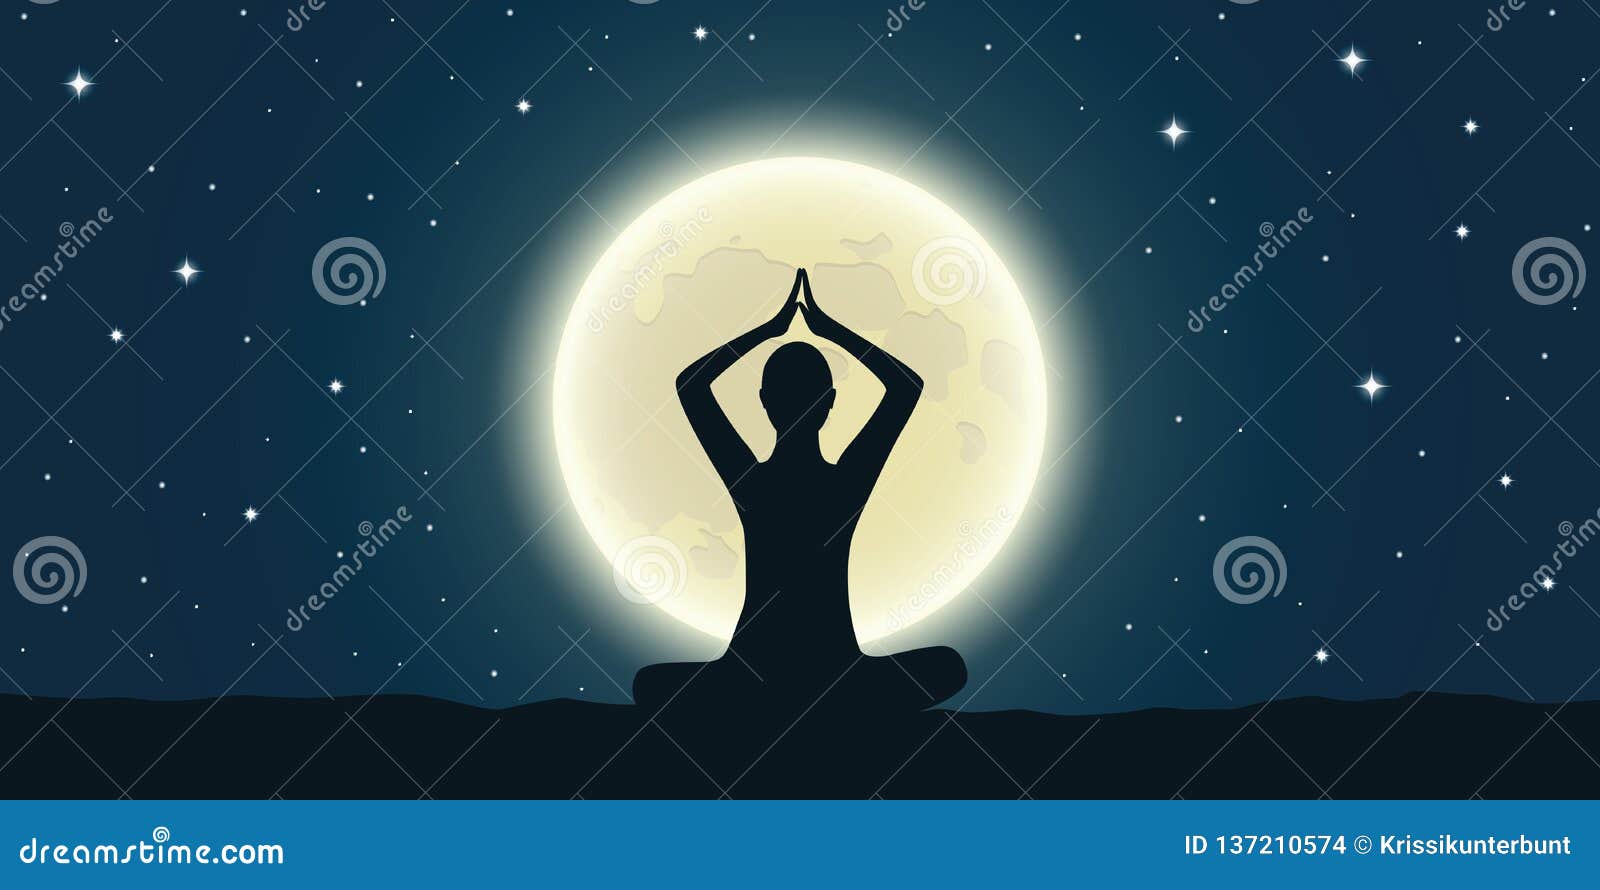 Peaceful Meditation at Full Moon and Starry Sky Stock Vector ...